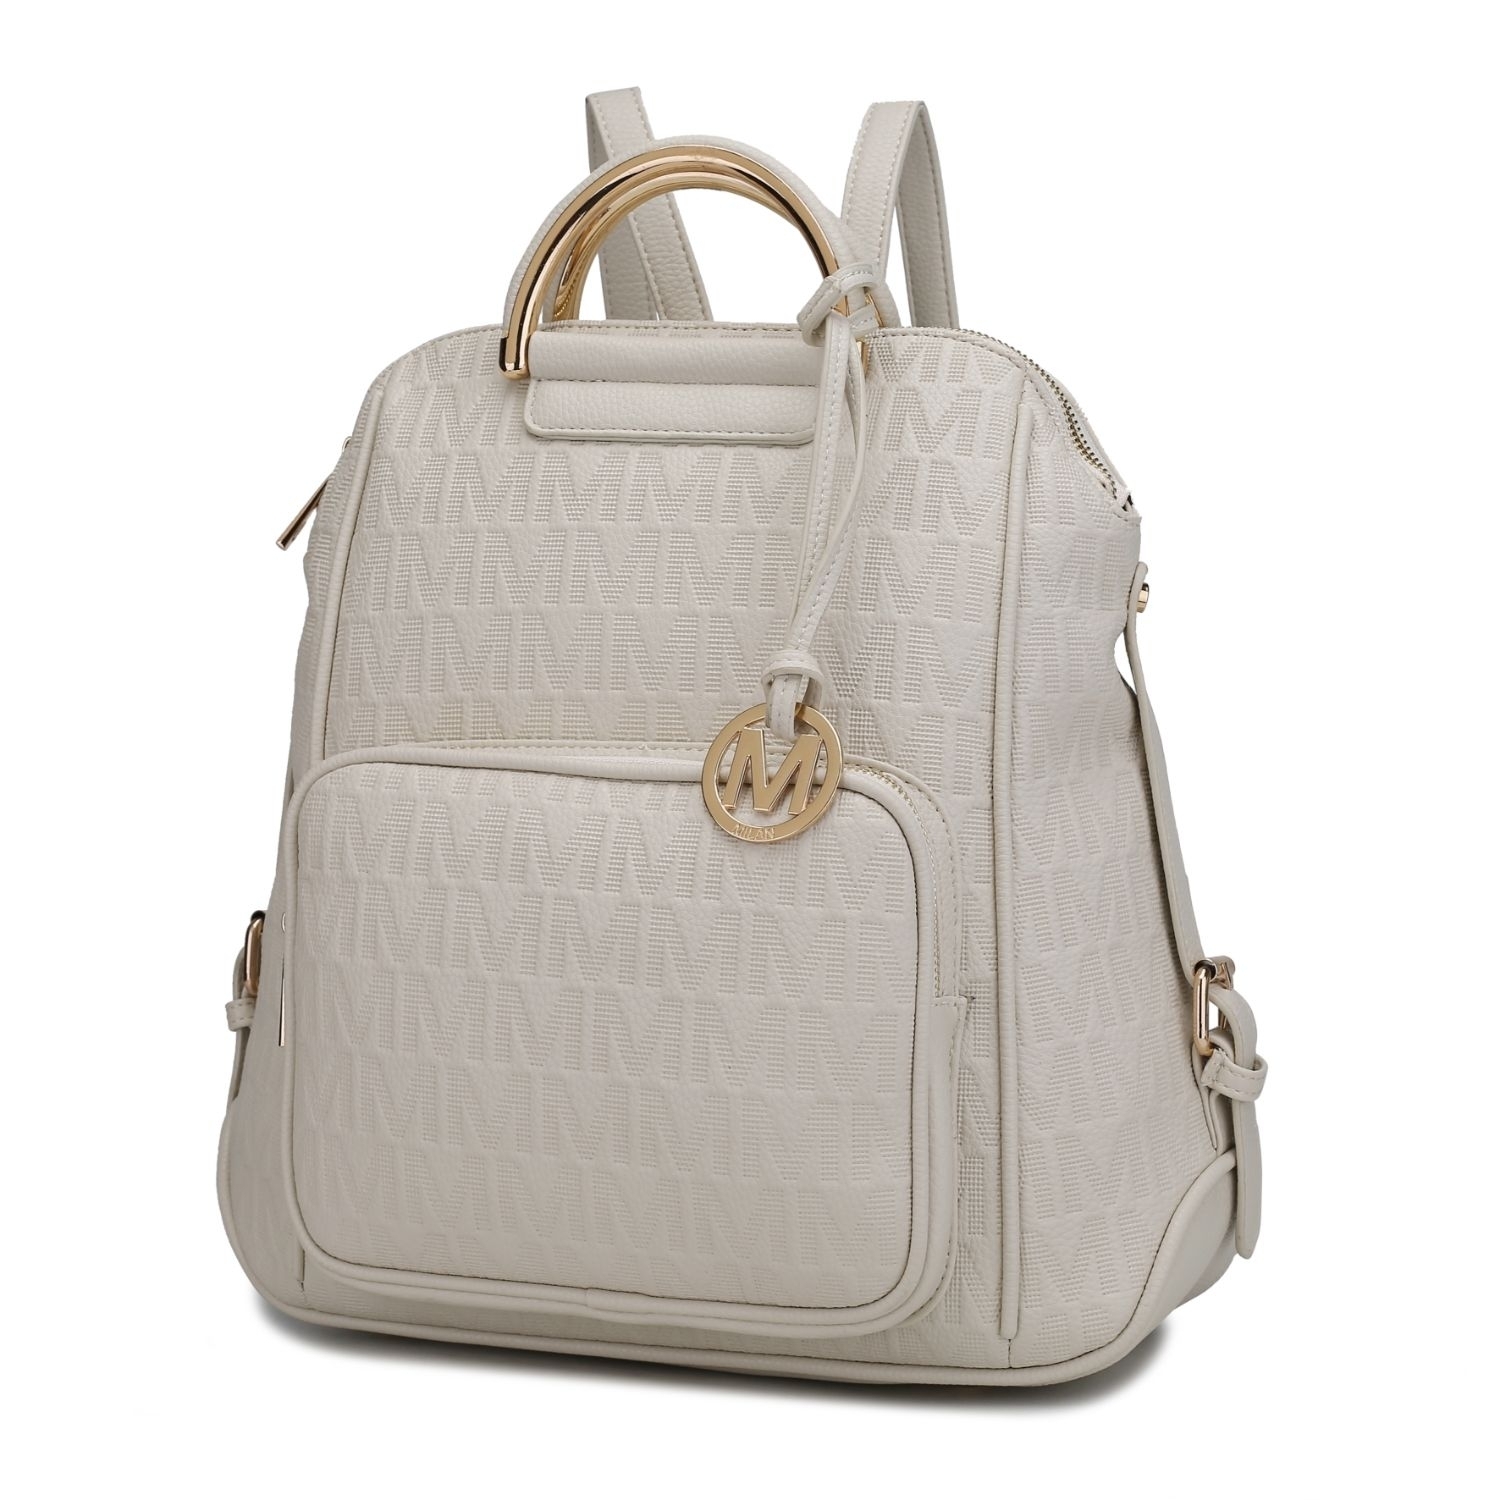 MKF Collection Torra Milan .M. Signature Trendy Backpack By Mia K. - Beige